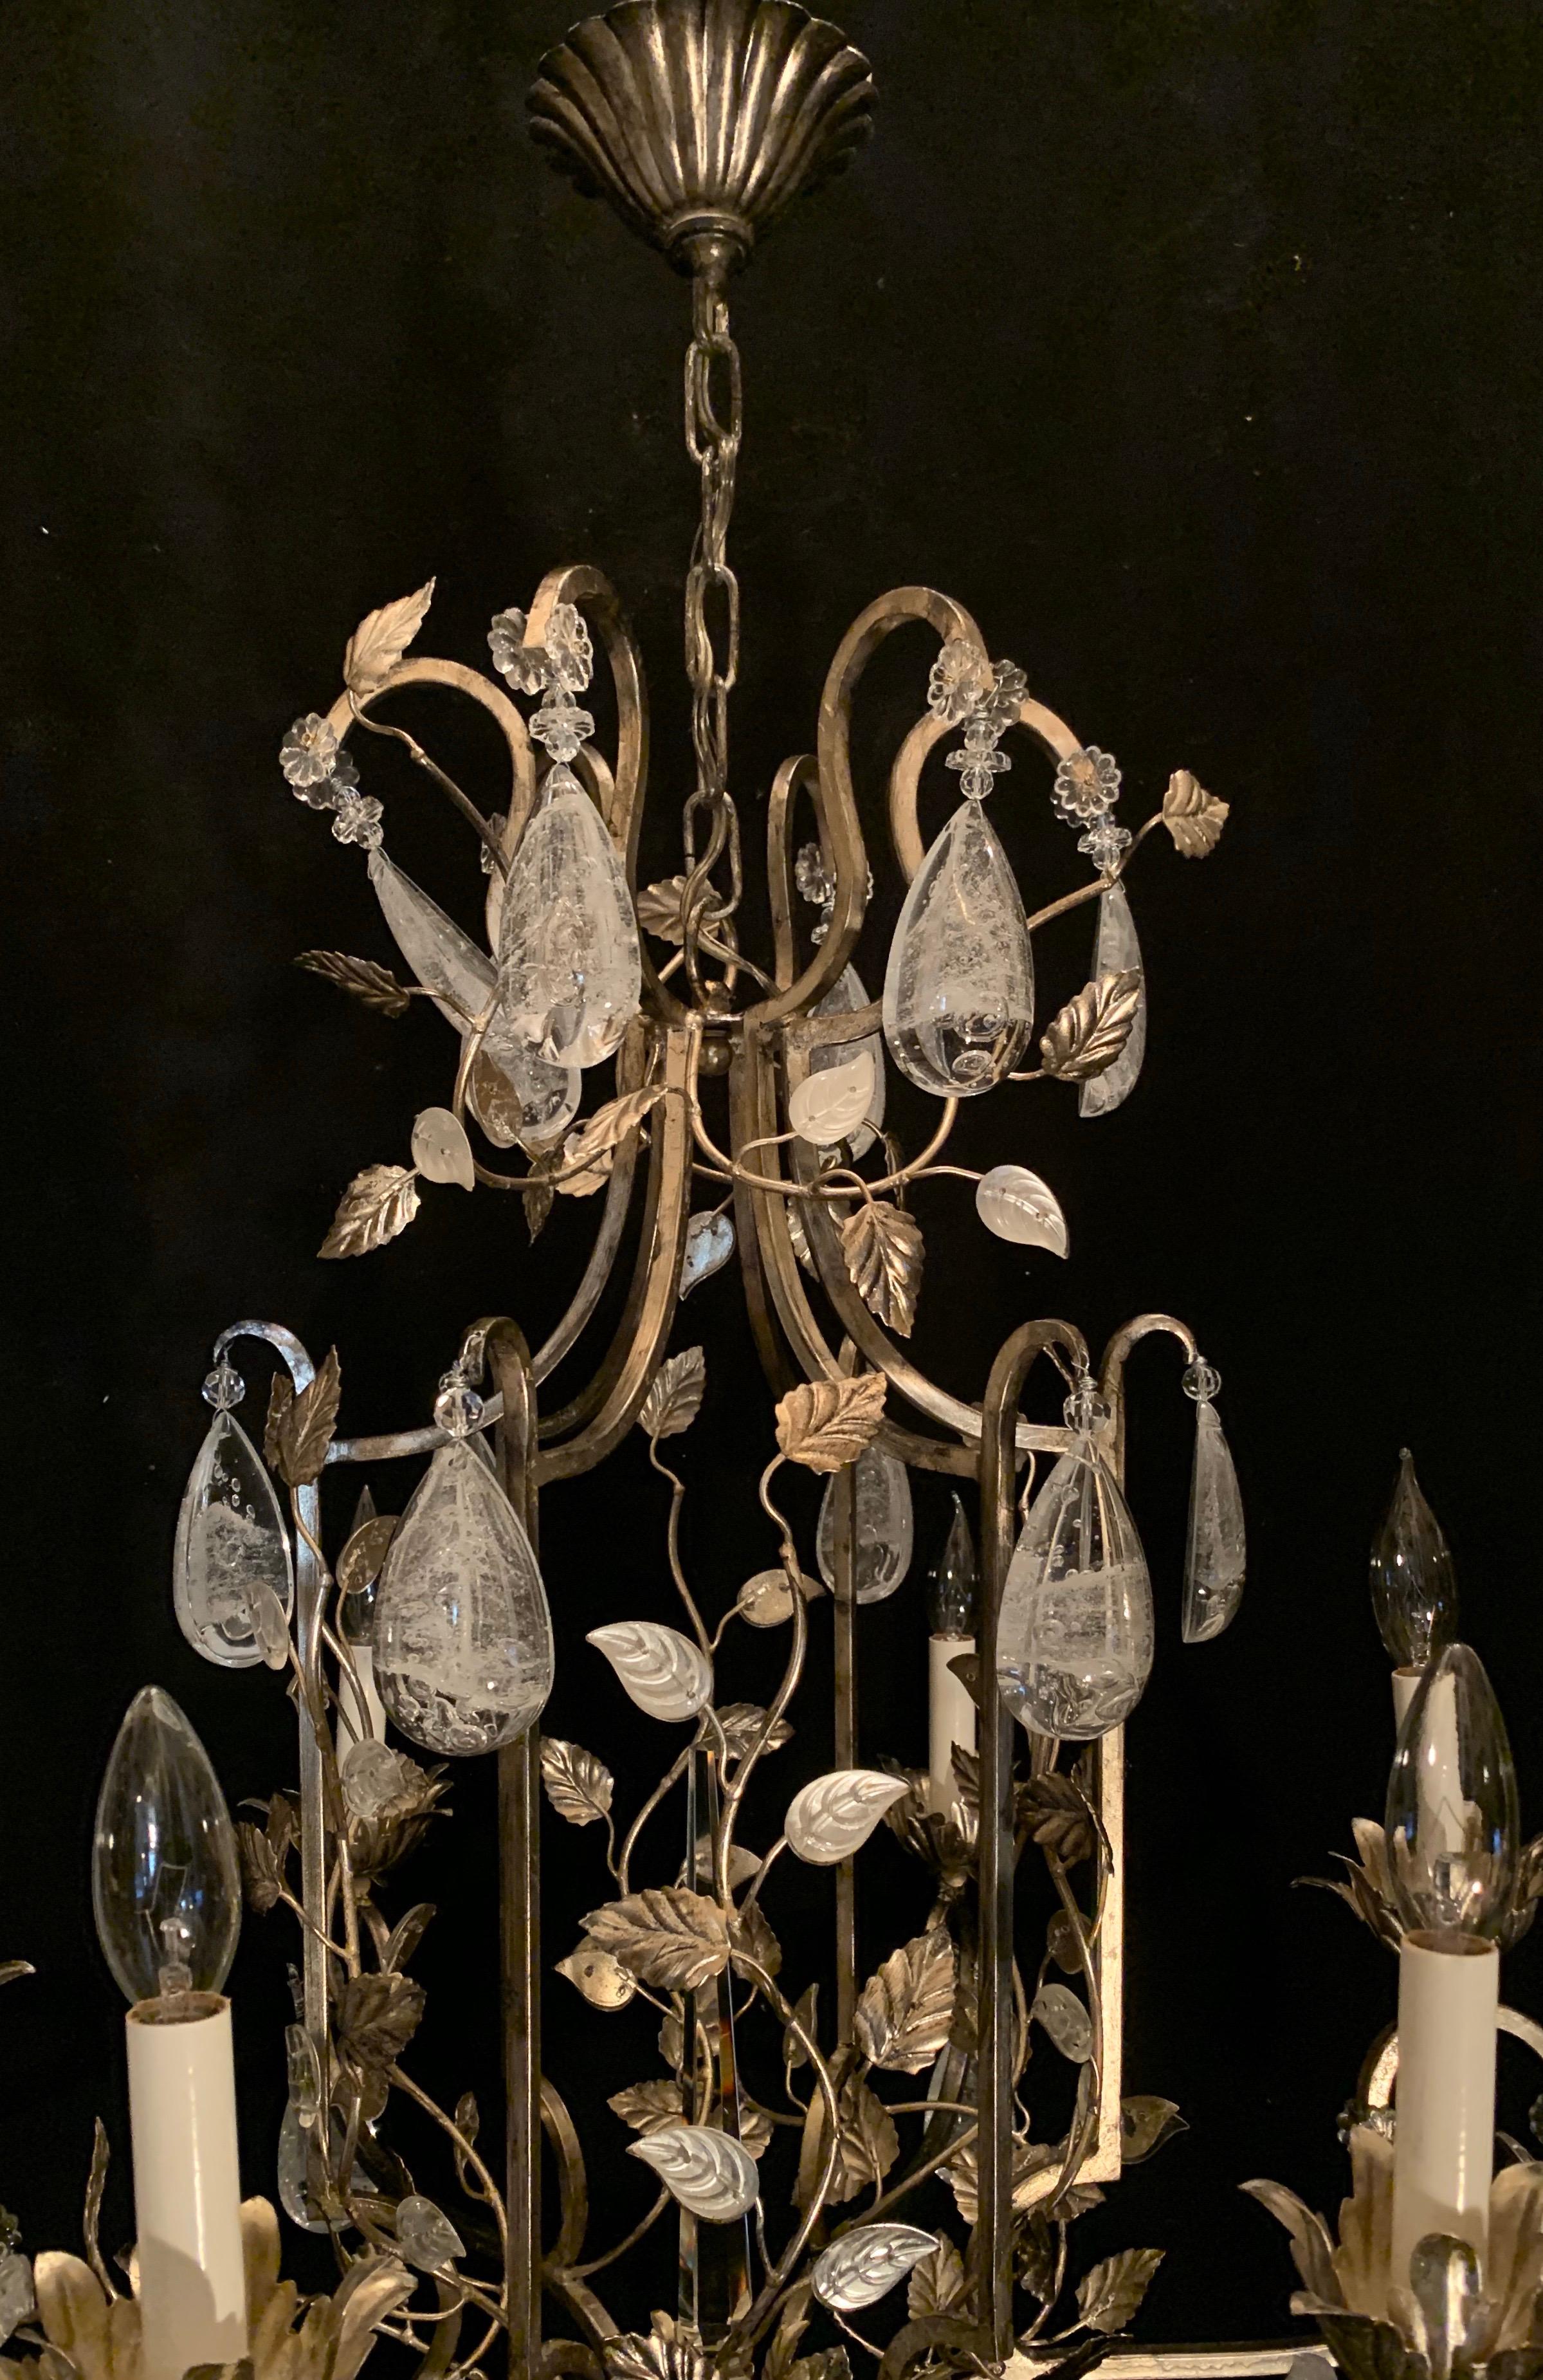 A wonderful pair of silver gilt Baguès style French Louis XVI faux rock crystal leaf and flower 6 candelabra light chandeliers, rewired and ready to install with chain canopy and all mounting hardware.